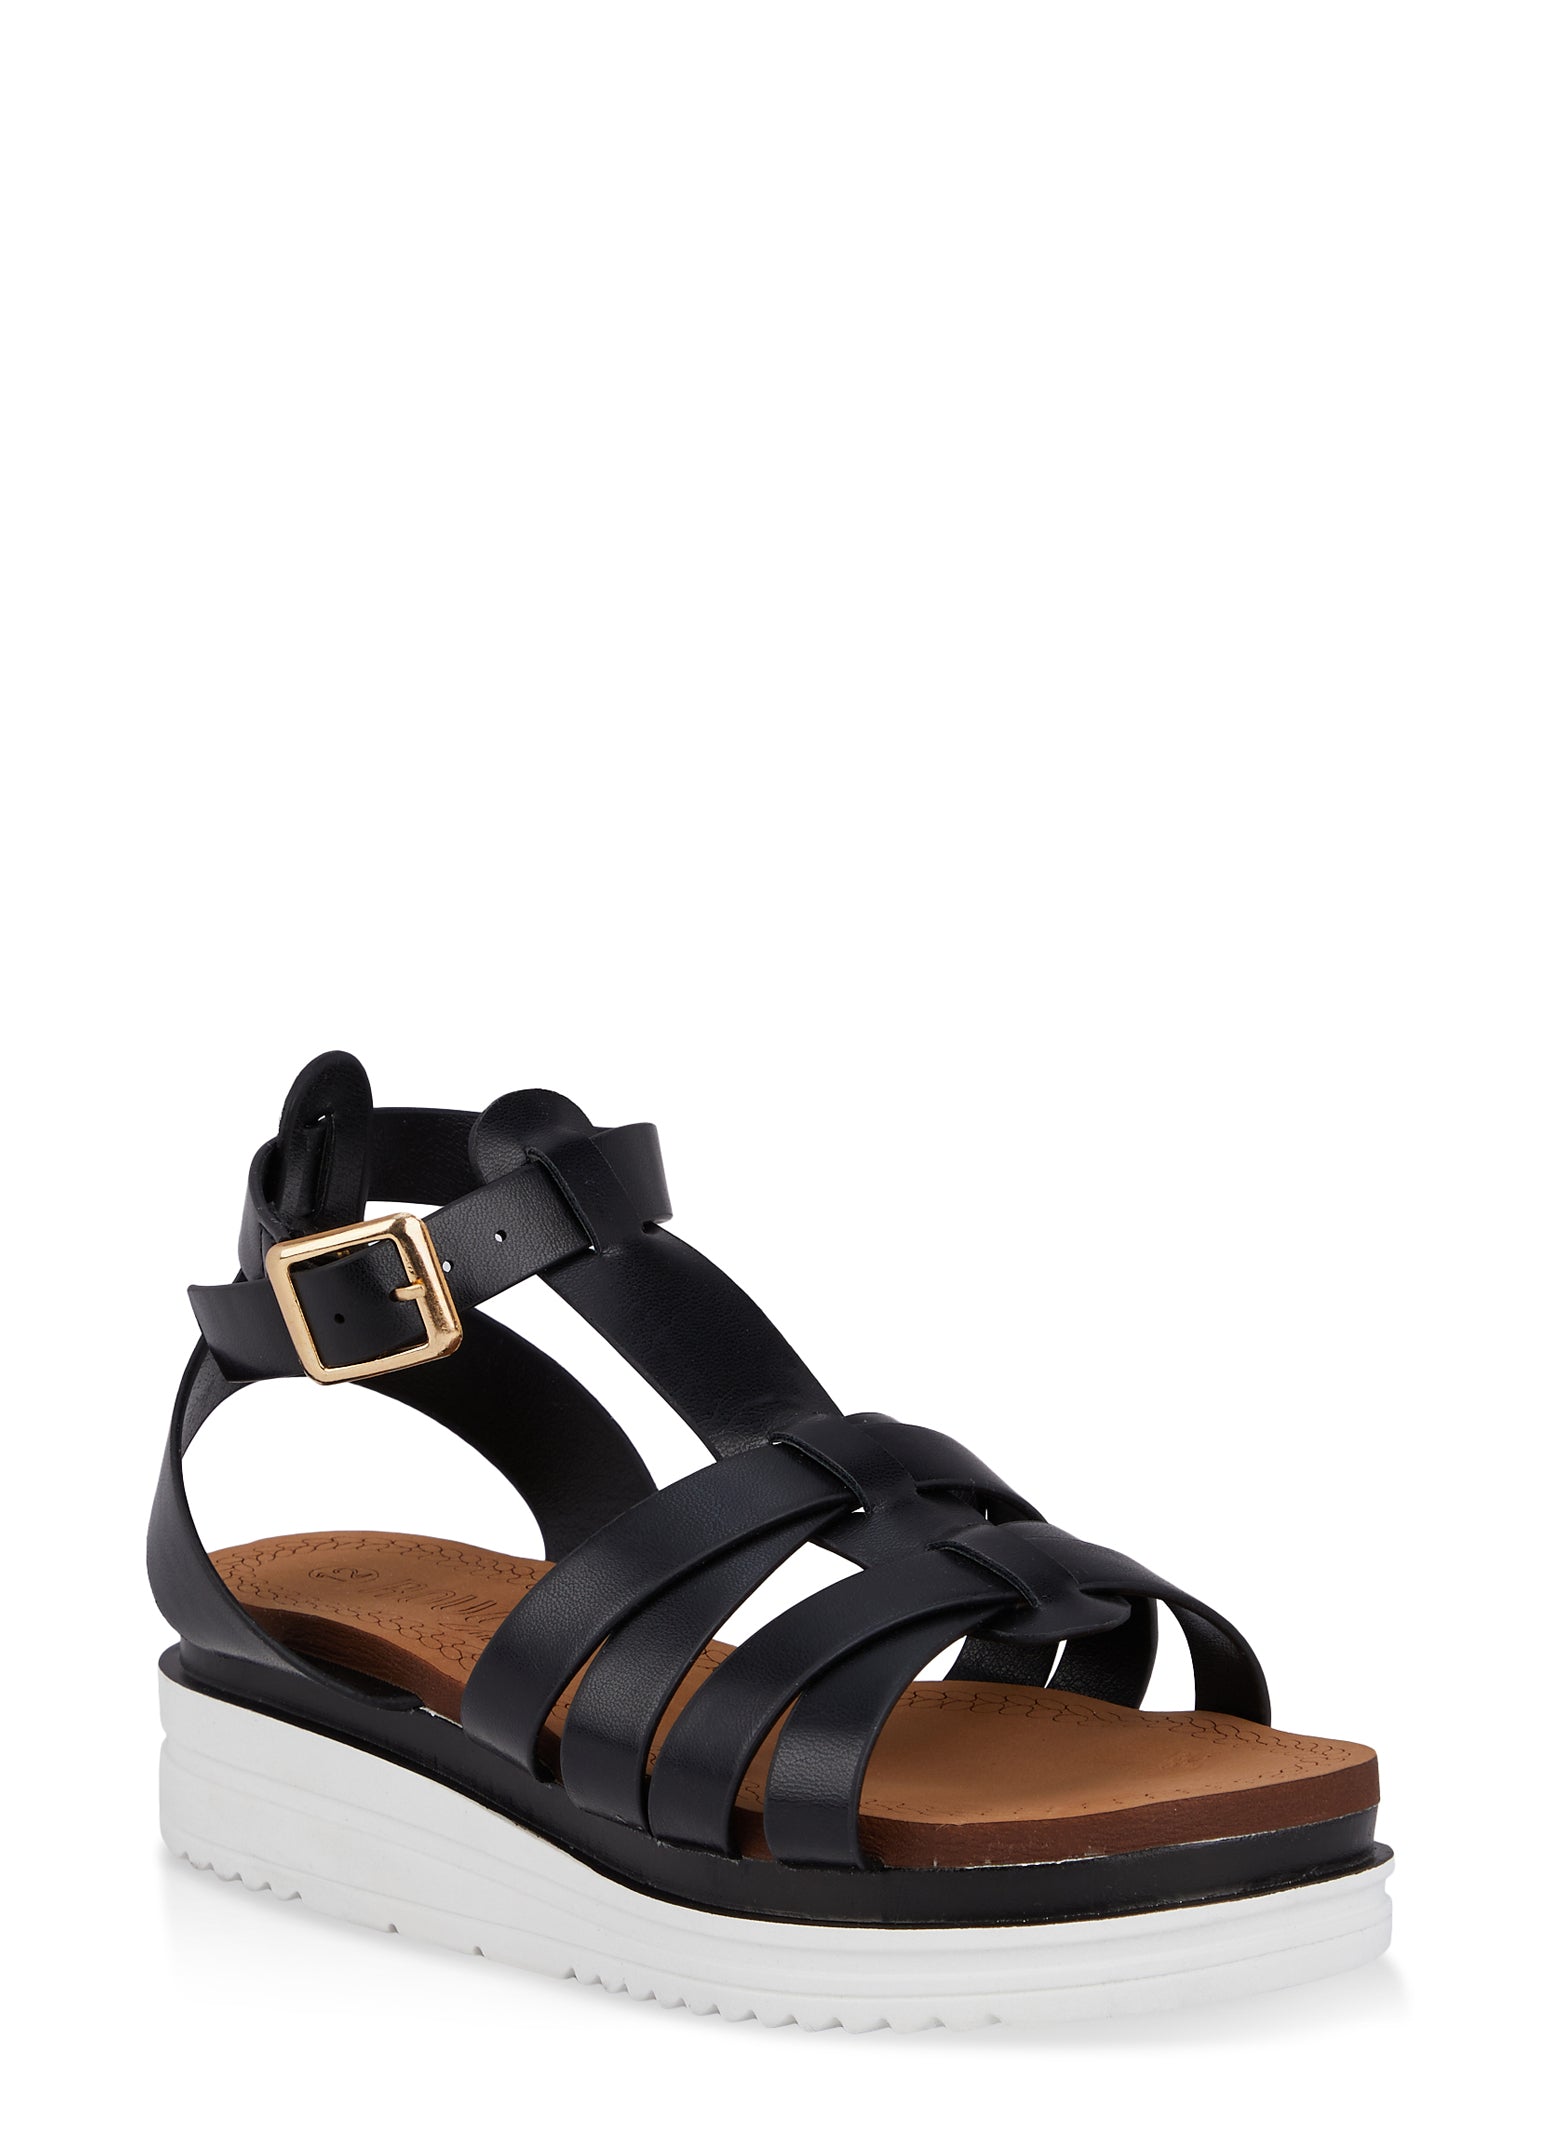 Girls Buckle Strap Wedge Gladiator Sandals, YOUTH